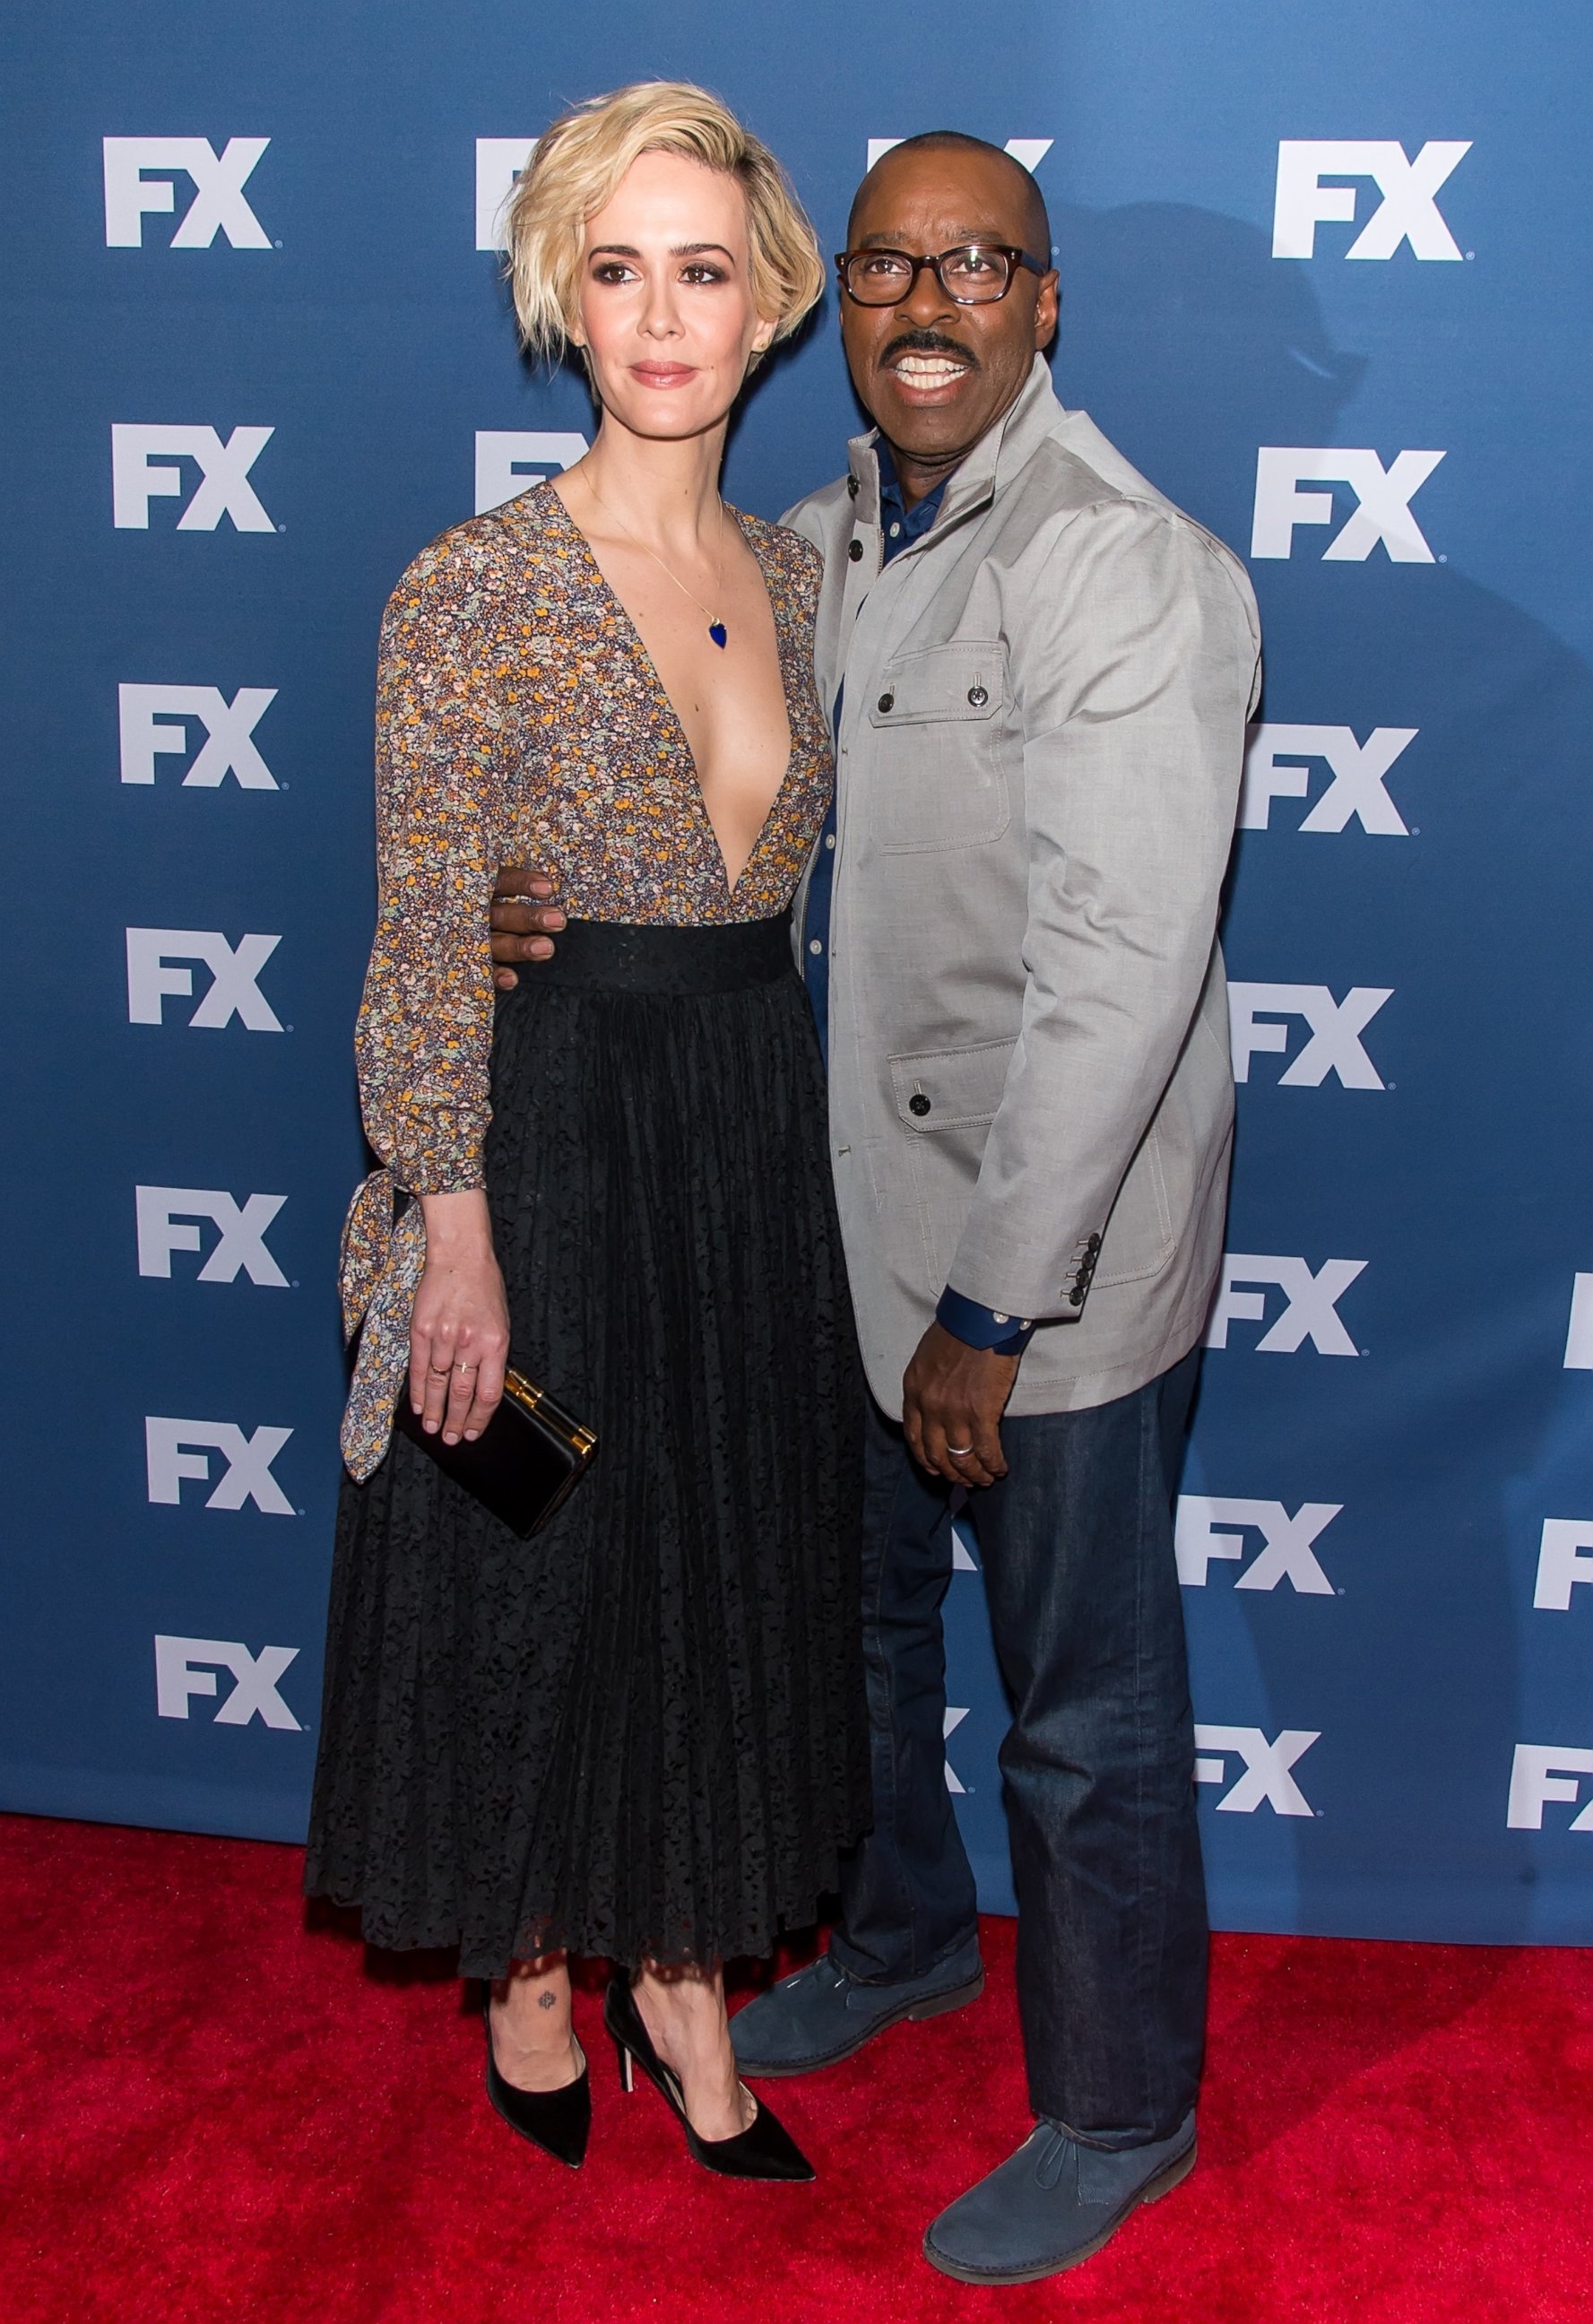 PHOTO: Sarah Paulson and Courtney B. Vance attend FX Networks Upfront Screening Of 'The People v. O.J. Simpson: American Crime Story' on March 30, 2016 in New York.  